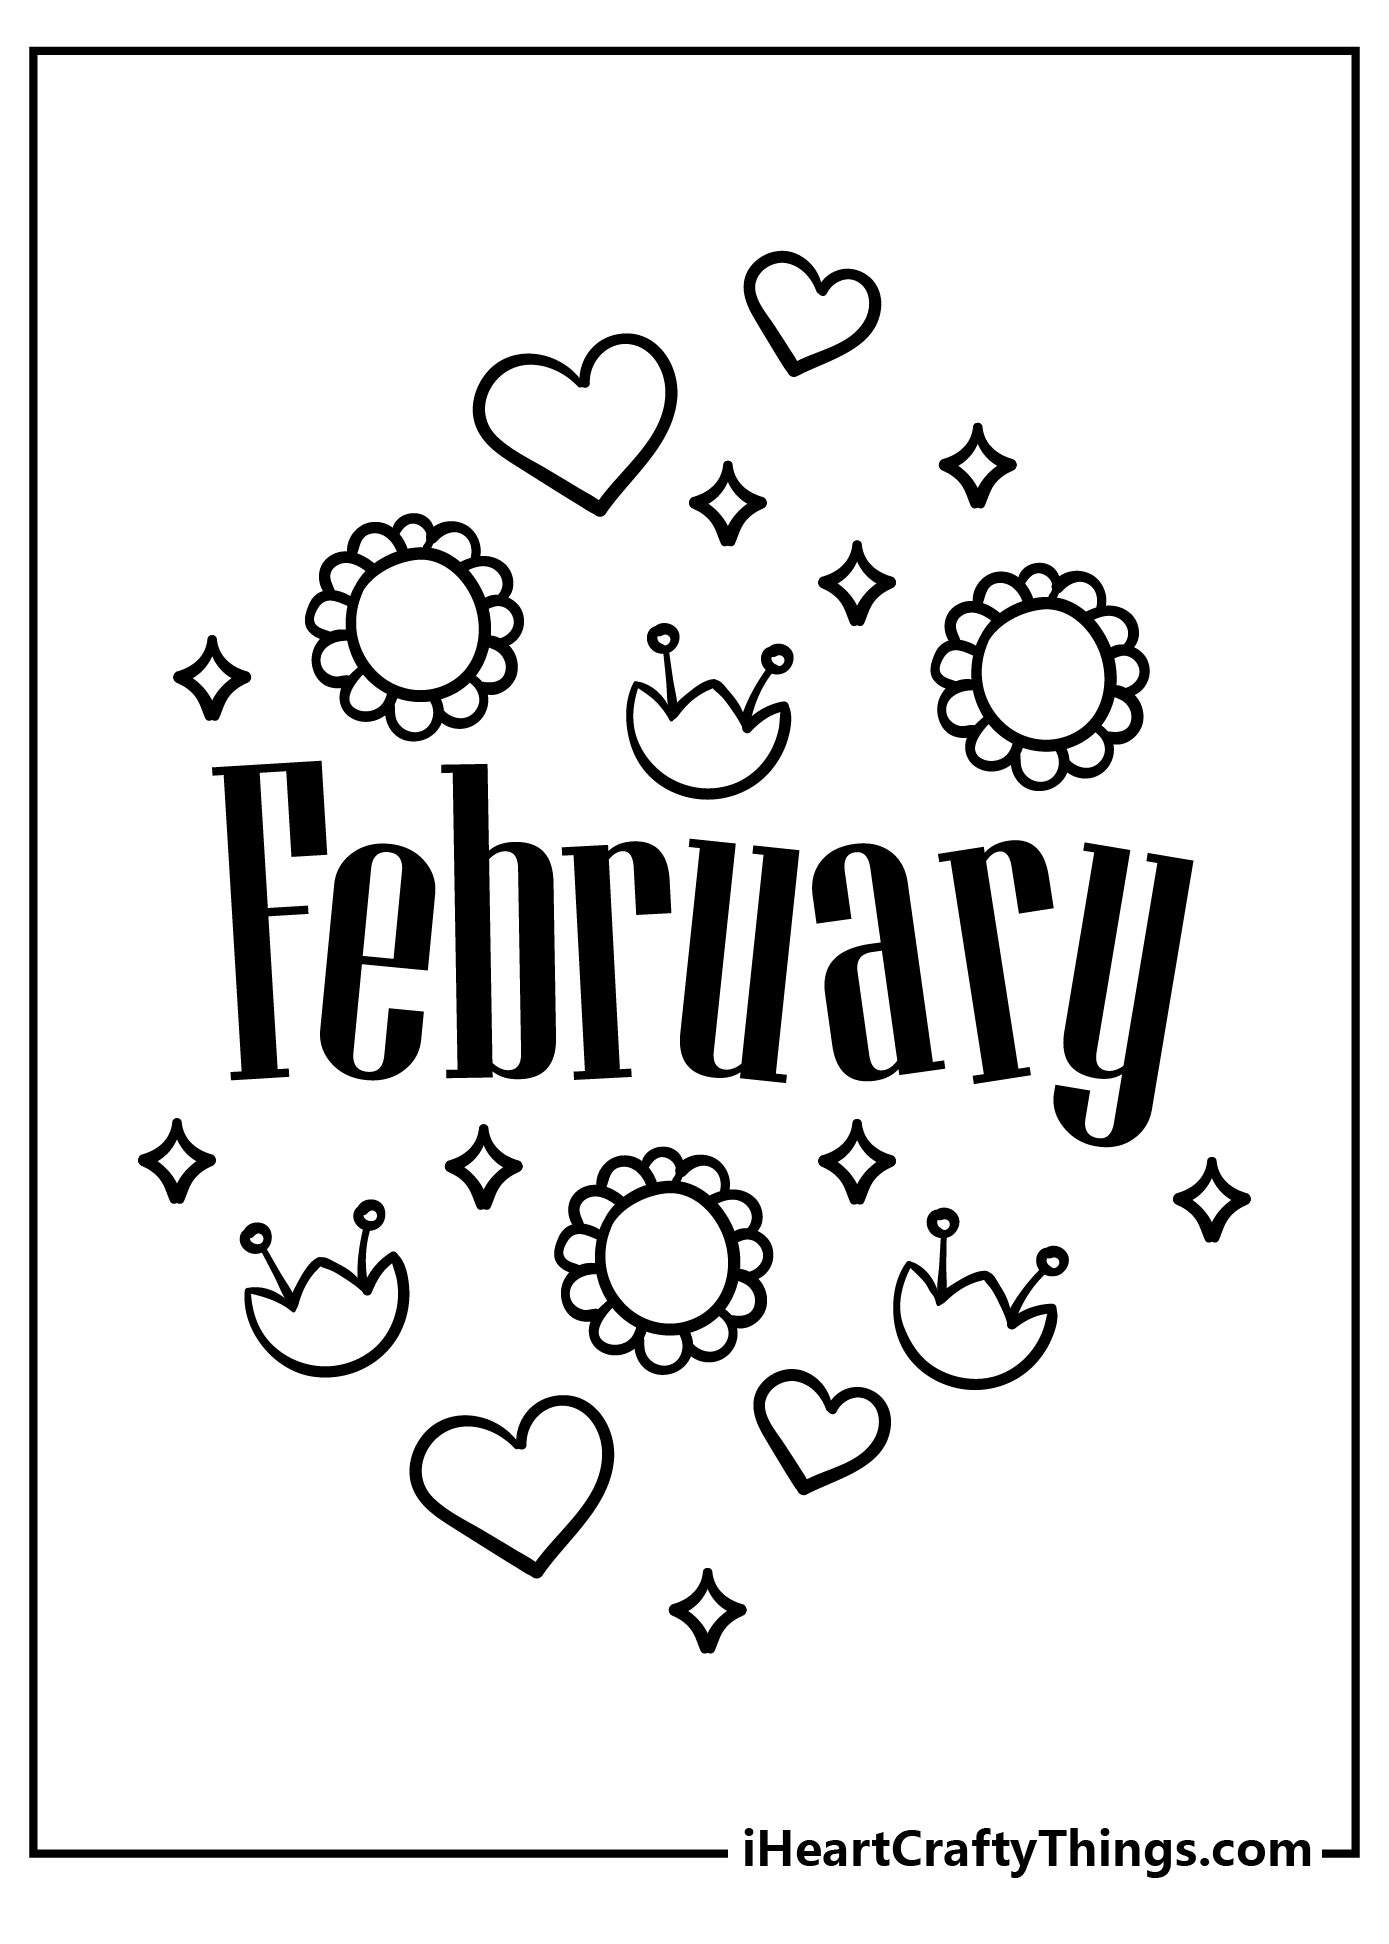 February Coloring Book for kids free printable